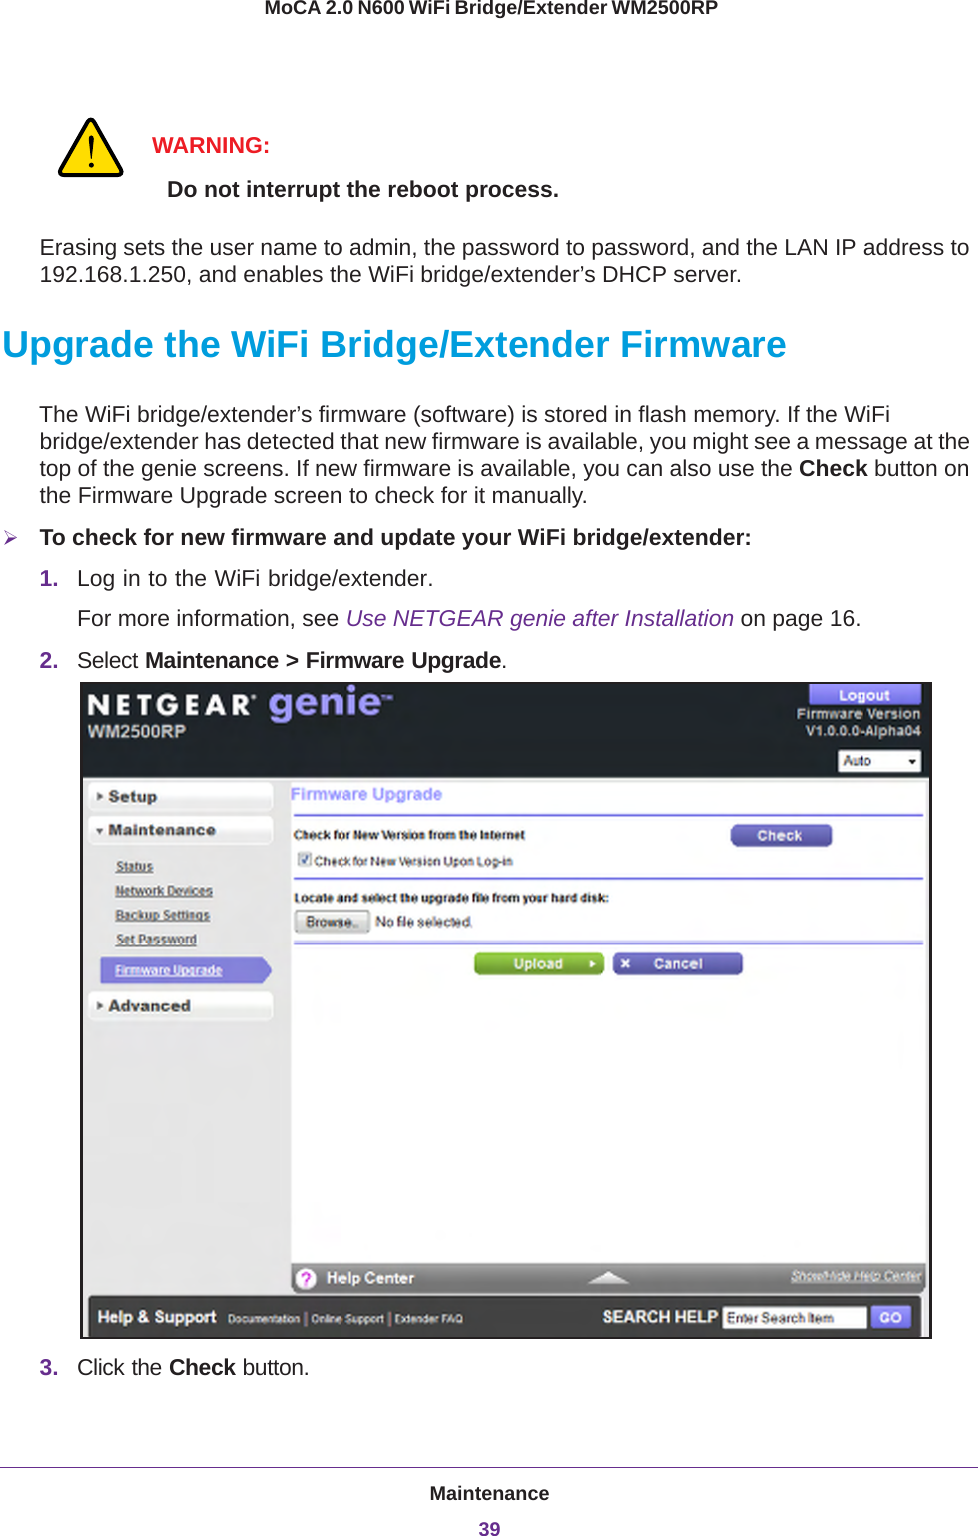 Maintenance39 MoCA 2.0 N600 WiFi Bridge/Extender WM2500RPWARNING:Do not interrupt the reboot process.Erasing sets the user name to admin, the password to password, and the LAN IP address to 192.168.1.250, and enables the WiFi bridge/extender’s DHCP server.Upgrade the WiFi Bridge/Extender FirmwareThe WiFi bridge/extender’s firmware (software) is stored in flash memory. If the WiFi bridge/extender has detected that new firmware is available, you might see a message at the top of the genie screens. If new firmware is available, you can also use the Check button on the Firmware Upgrade screen to check for it manually.To check for new firmware and update your WiFi bridge/extender:1. Log in to the WiFi bridge/extender.For more information, see Use NETGEAR genie after Installation on page  16.2. Select Maintenance &gt; Firmware Upgrade. 3. Click the Check button.